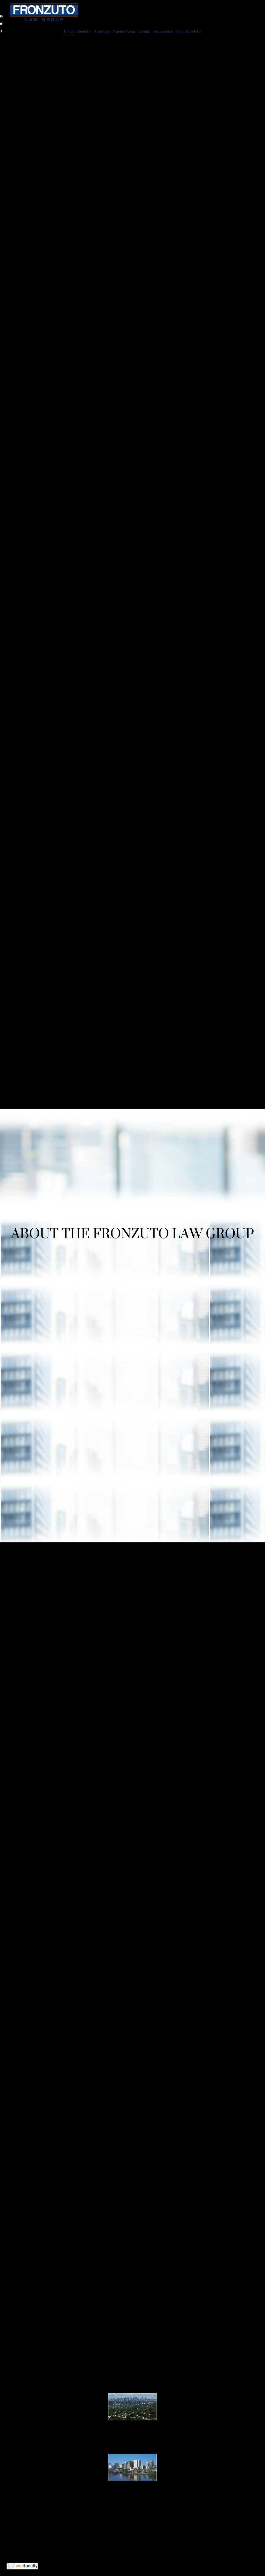 Fronzuto Law Group - Woodland Park NJ Lawyers